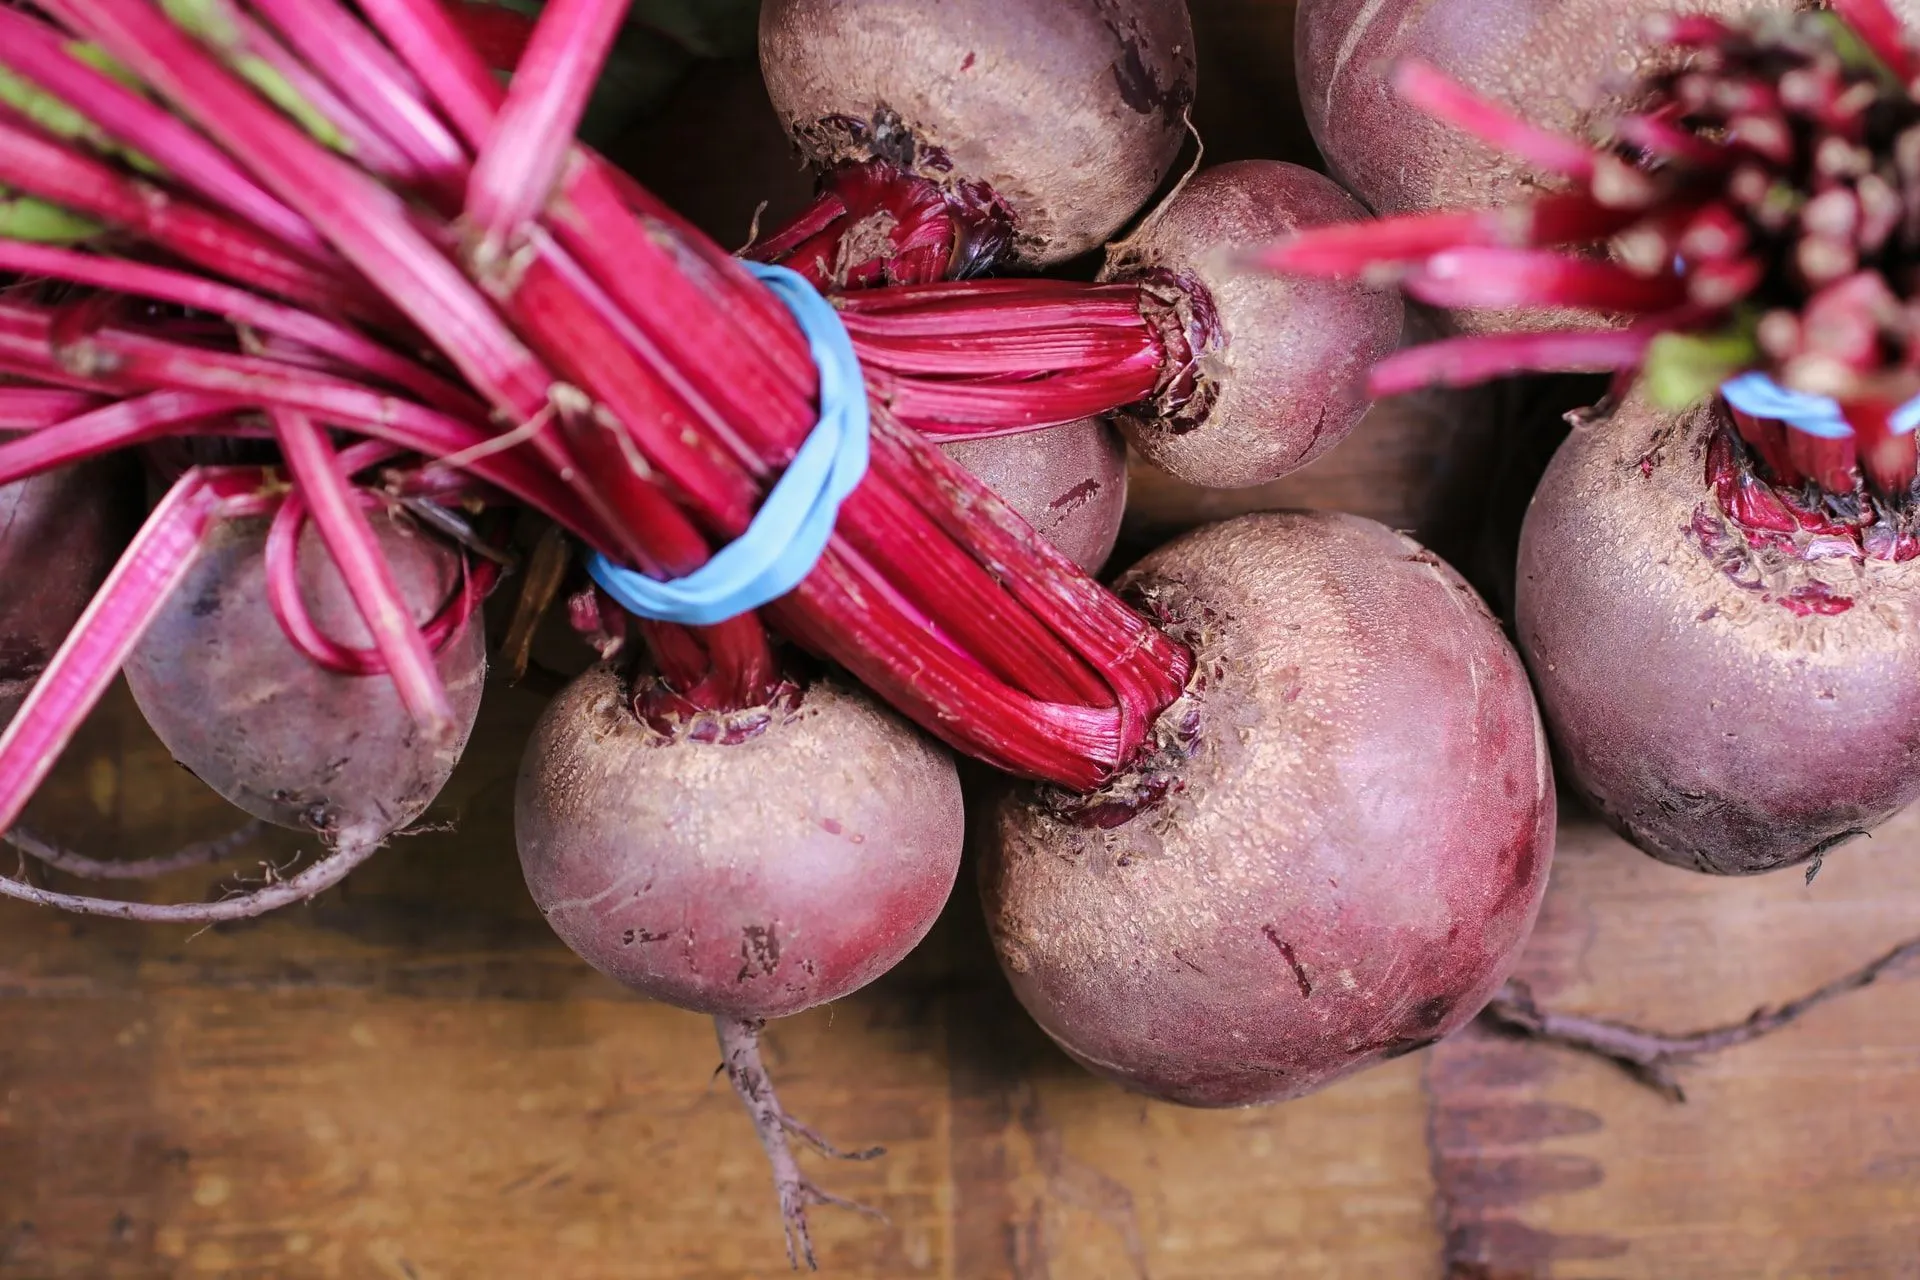 Learn about canned beet if you prefer canned vegetables.